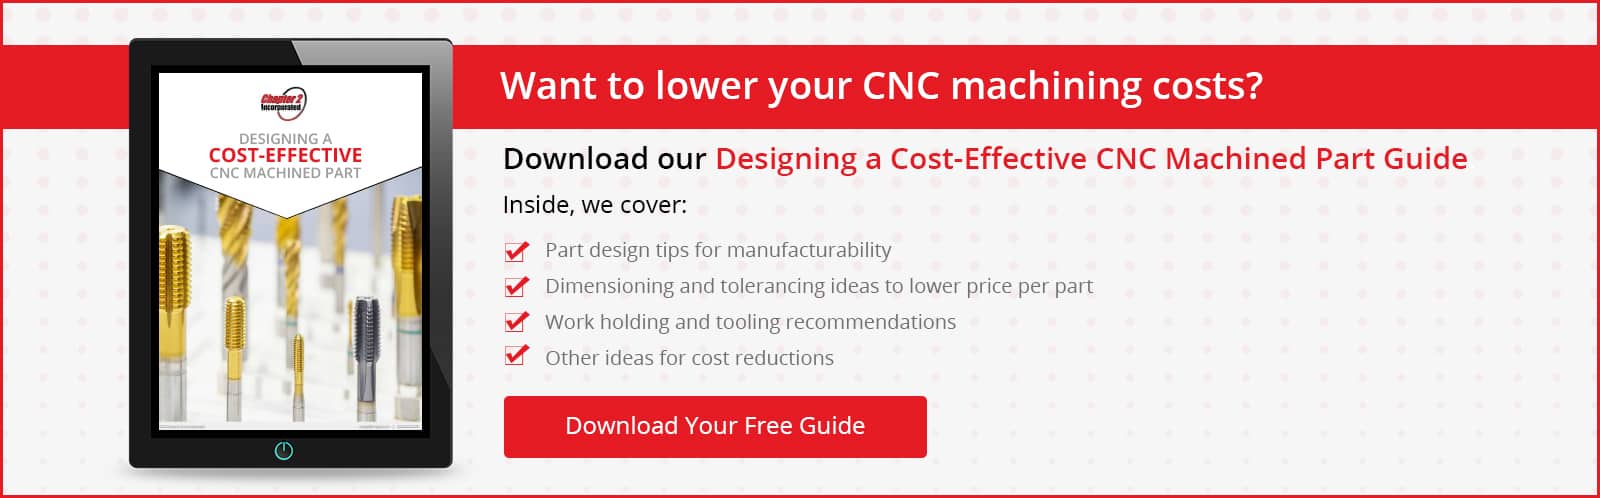 Download our guide on designing a cost-effective cnc machined part